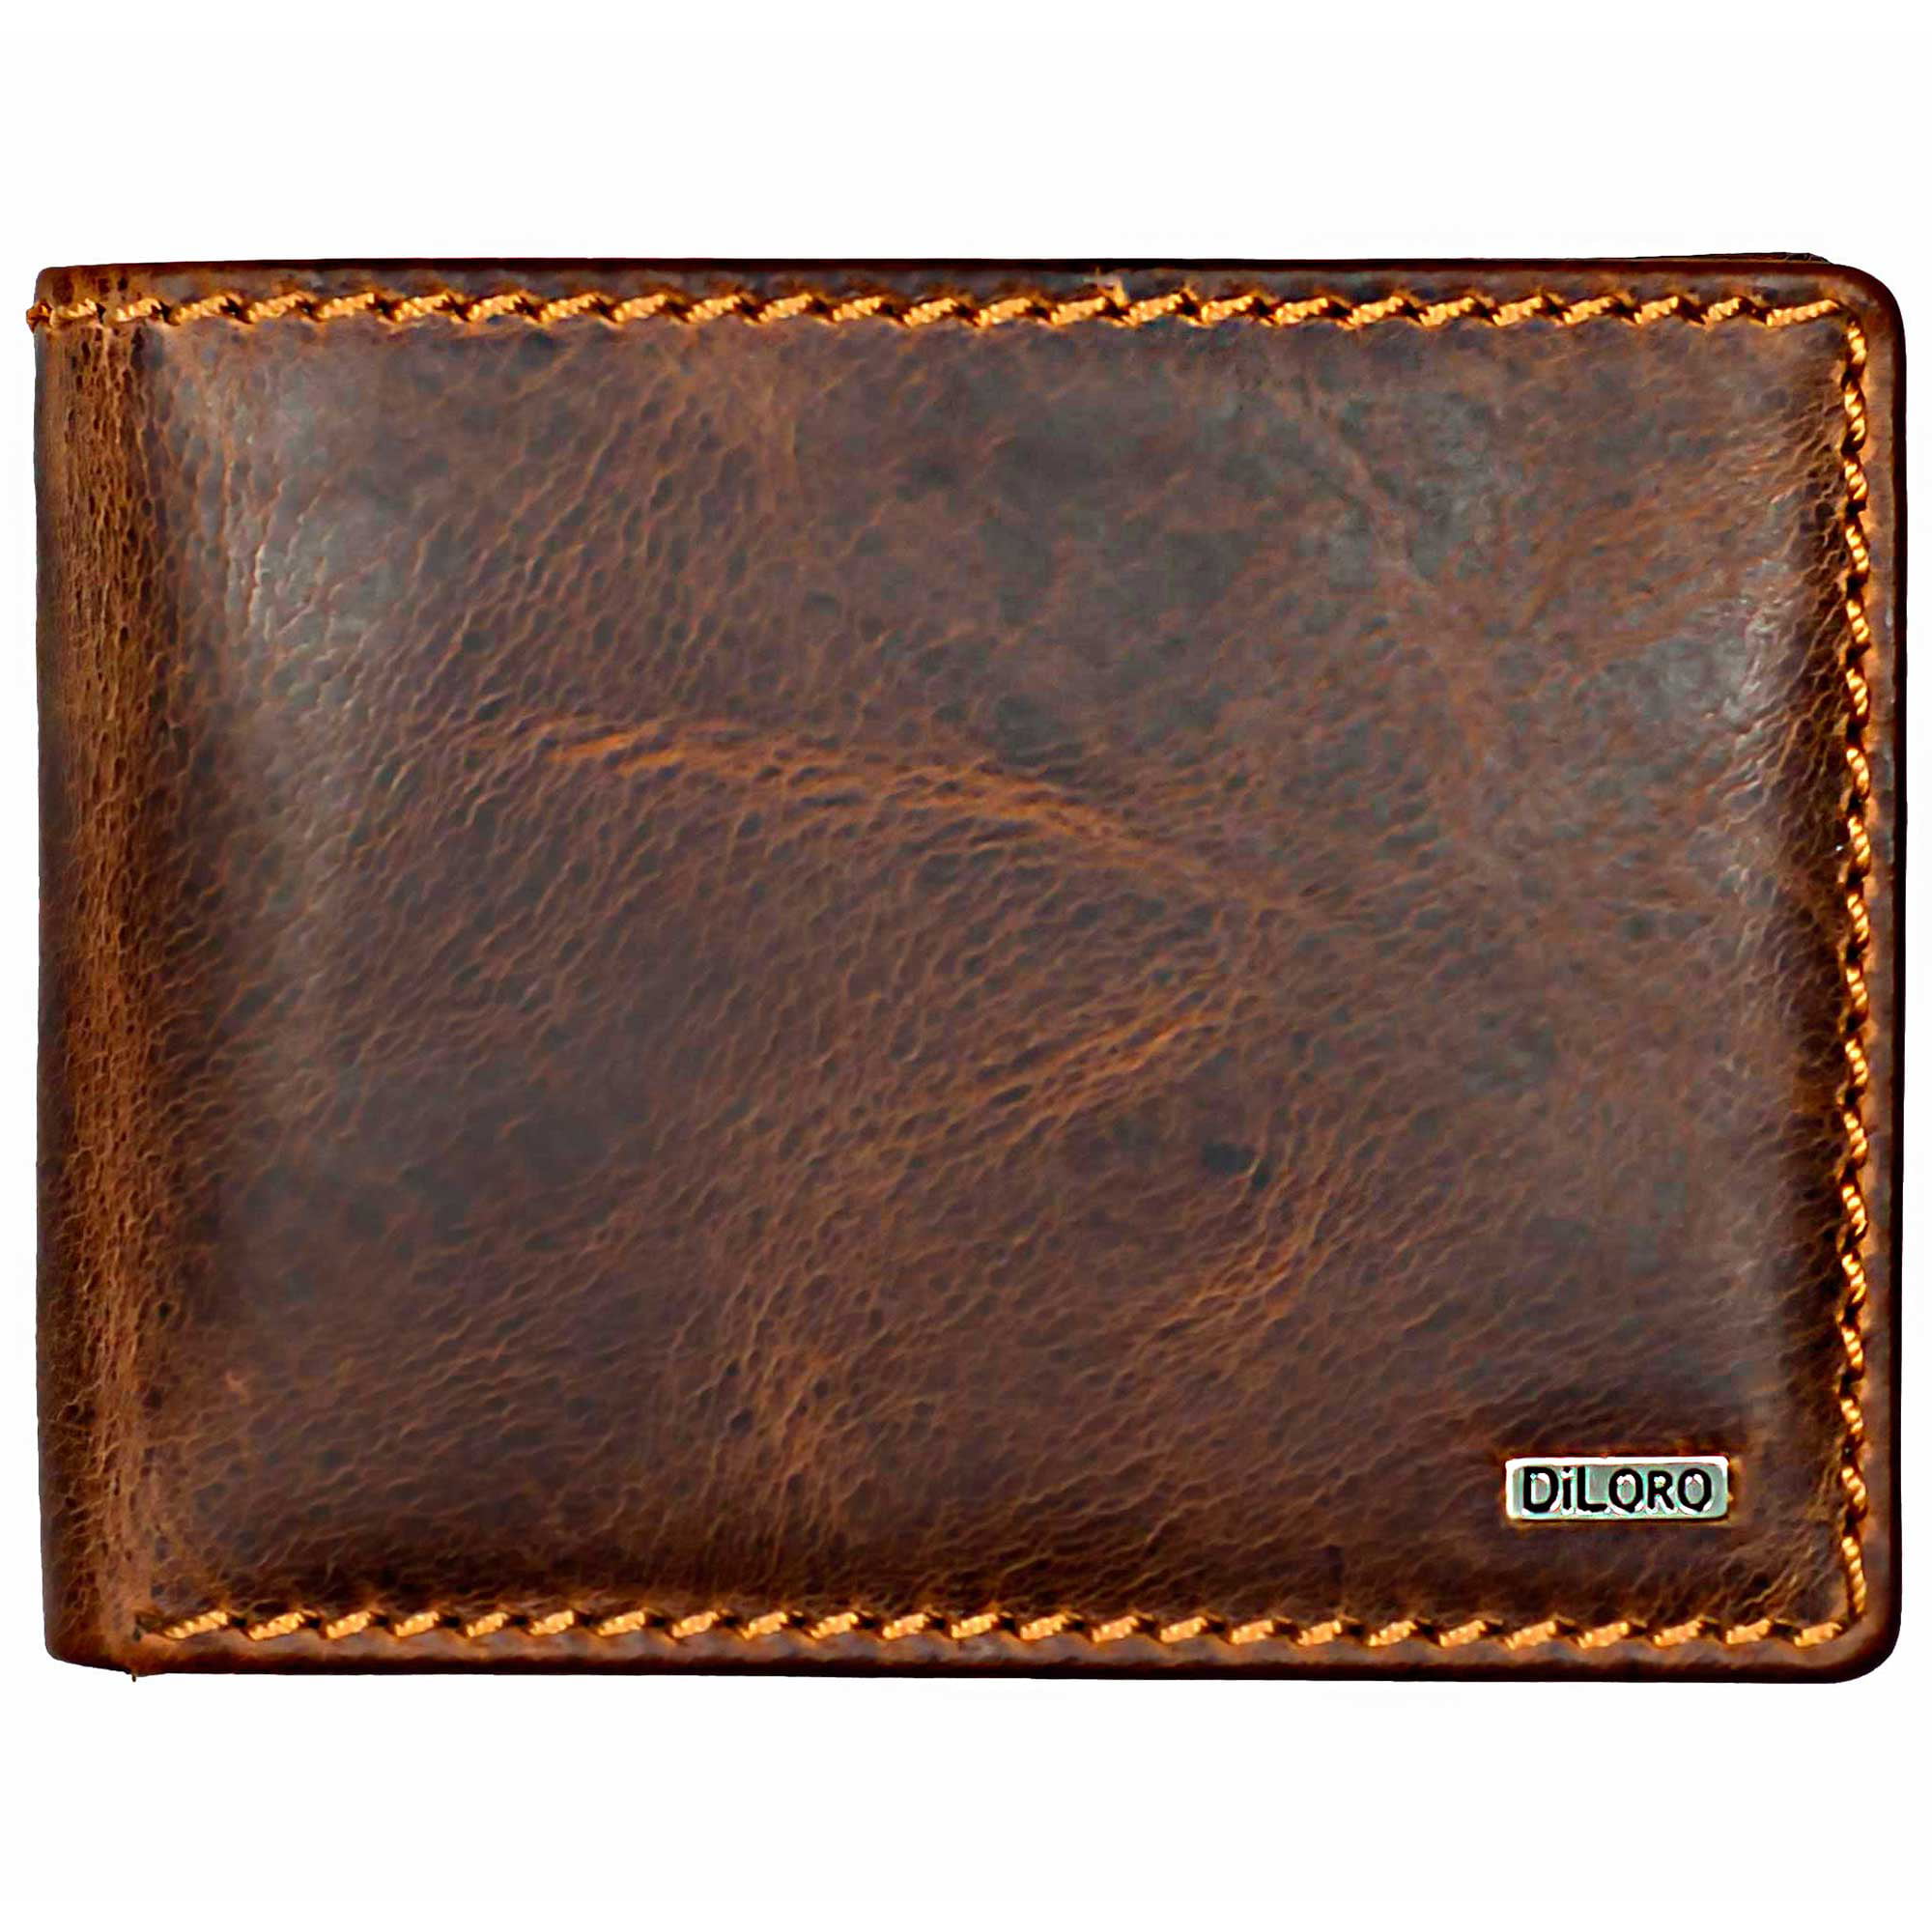 DiLoro Italy Mens Leather Wallet Bifold Flip ID Coin Section RFID Protection 